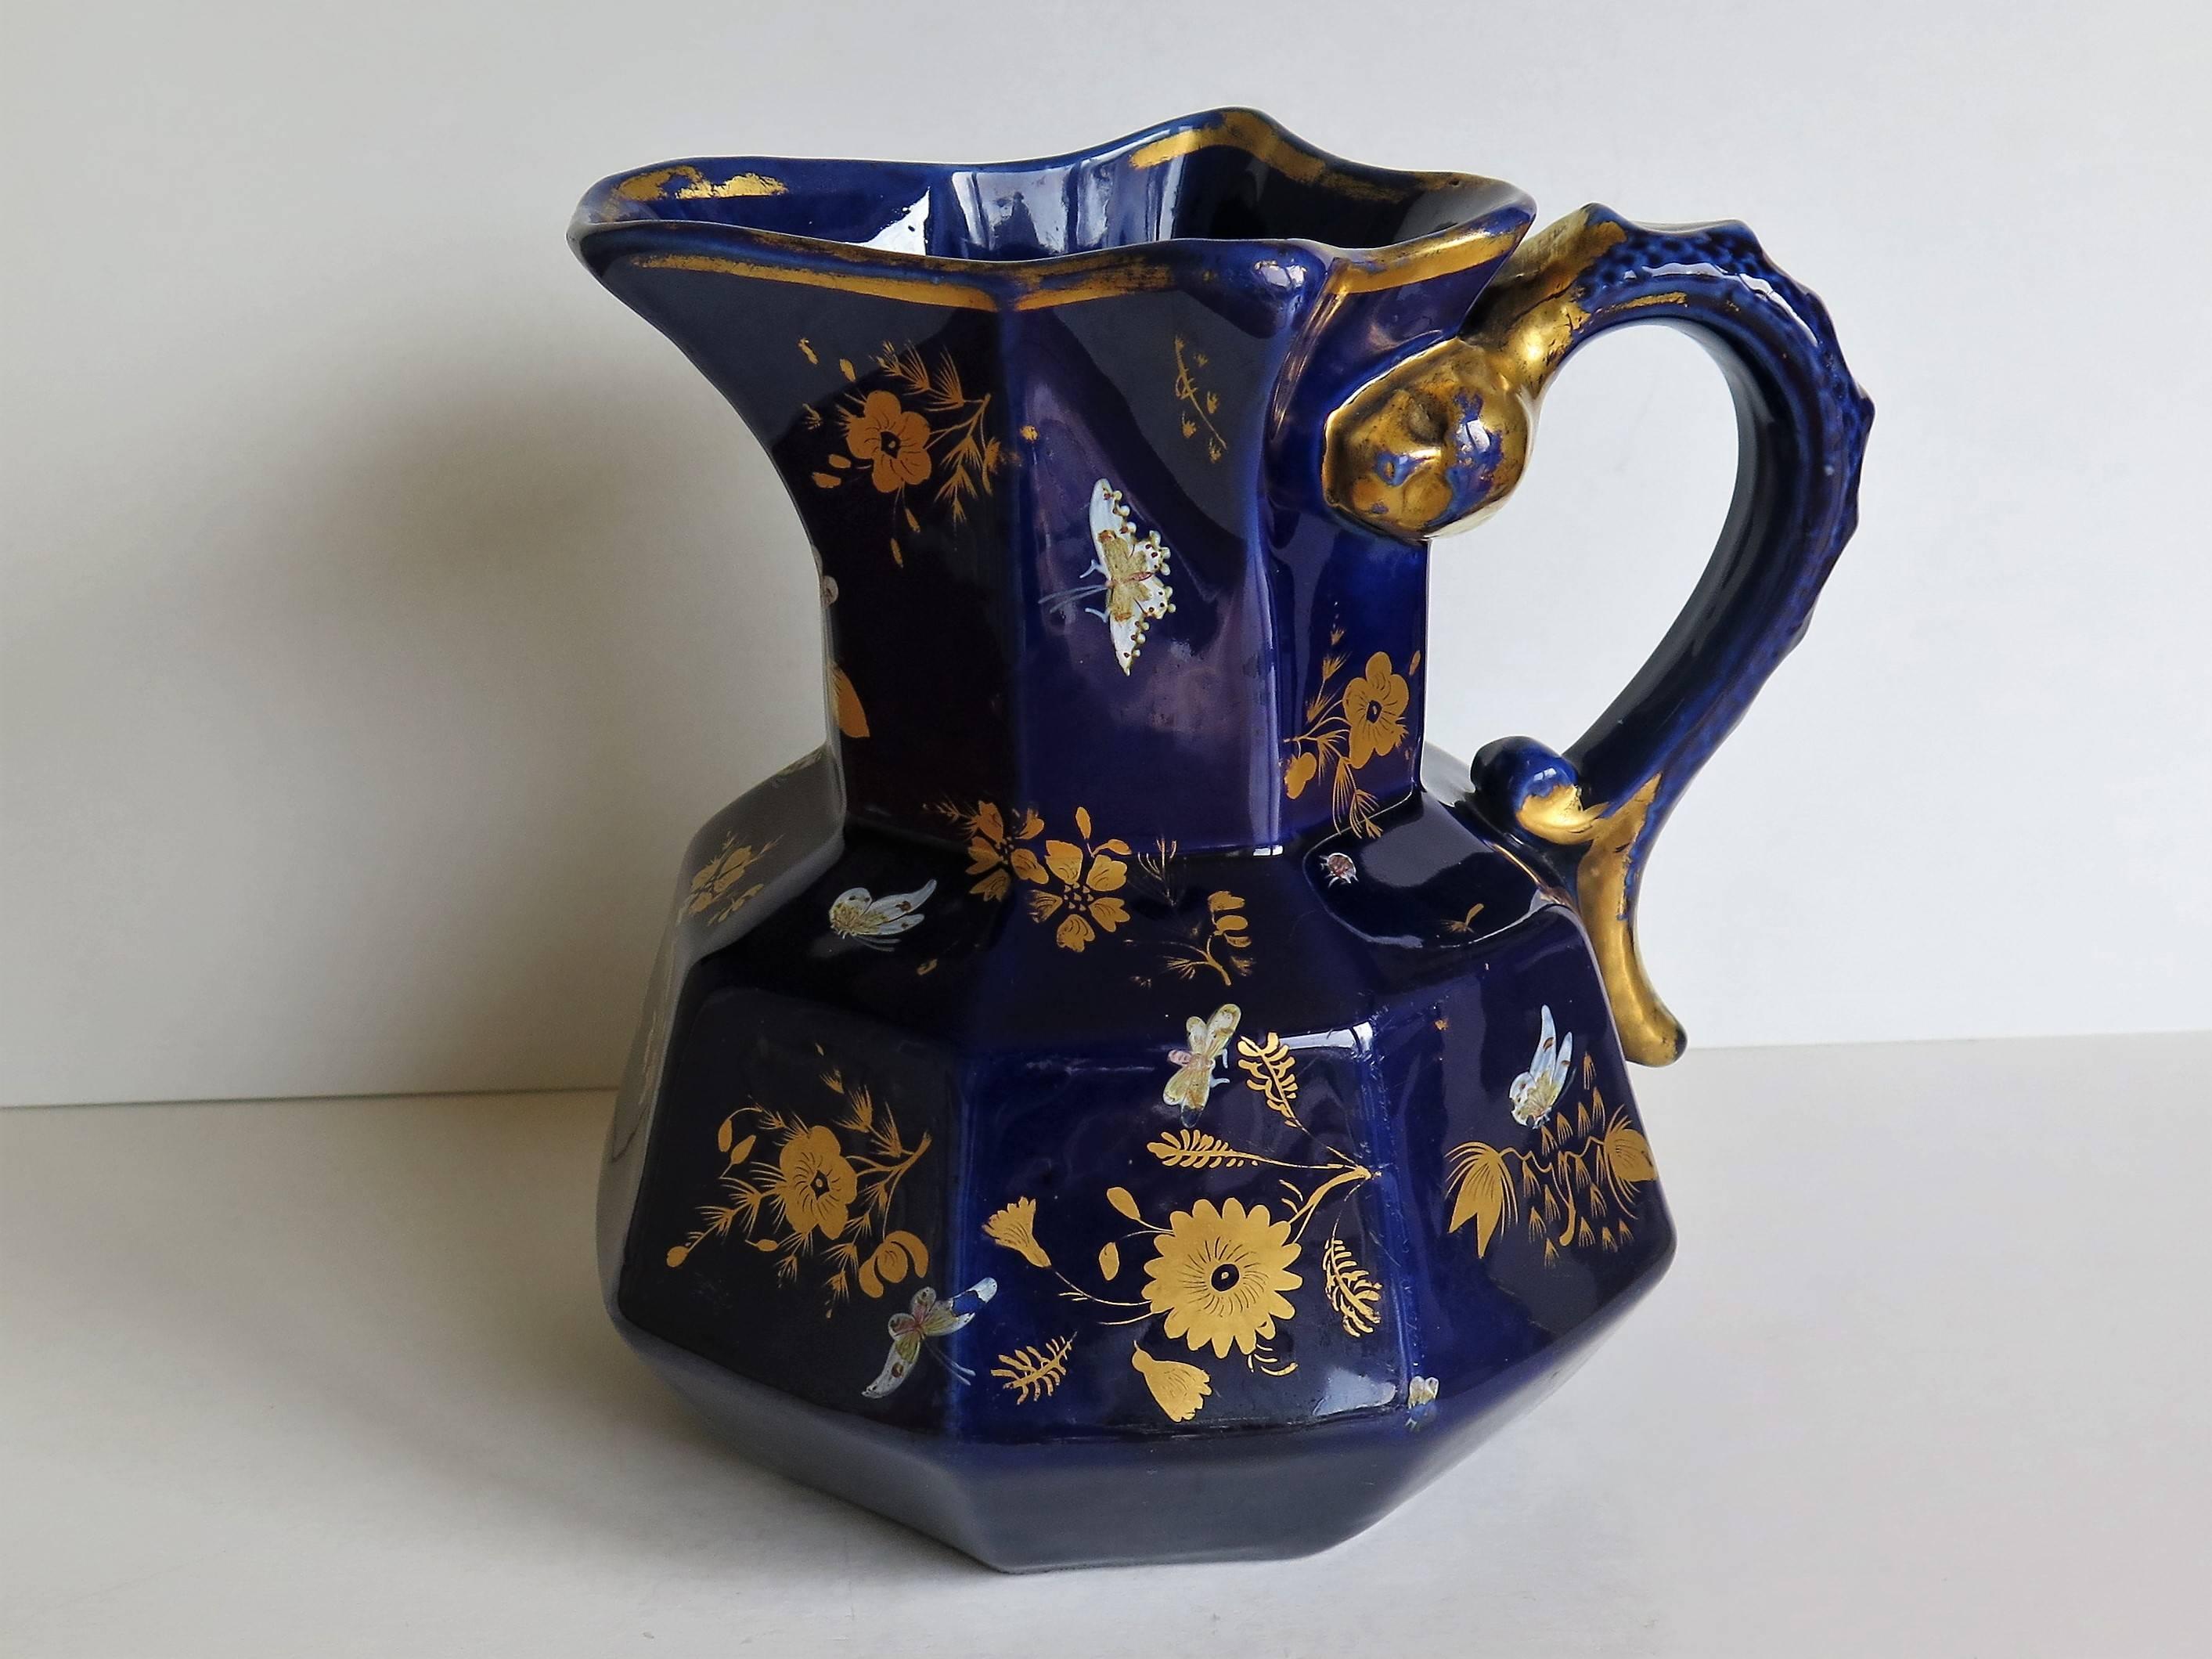 This is a large ironstone jug or pitcher in the Hydra Shape with a rare pattern, made by Mason's, of Lane Delph, Staffordshire, England, Circa 1825. 

The jug is octagonal with a good snake loop handle.

The piece is richly hand-decorated in gold